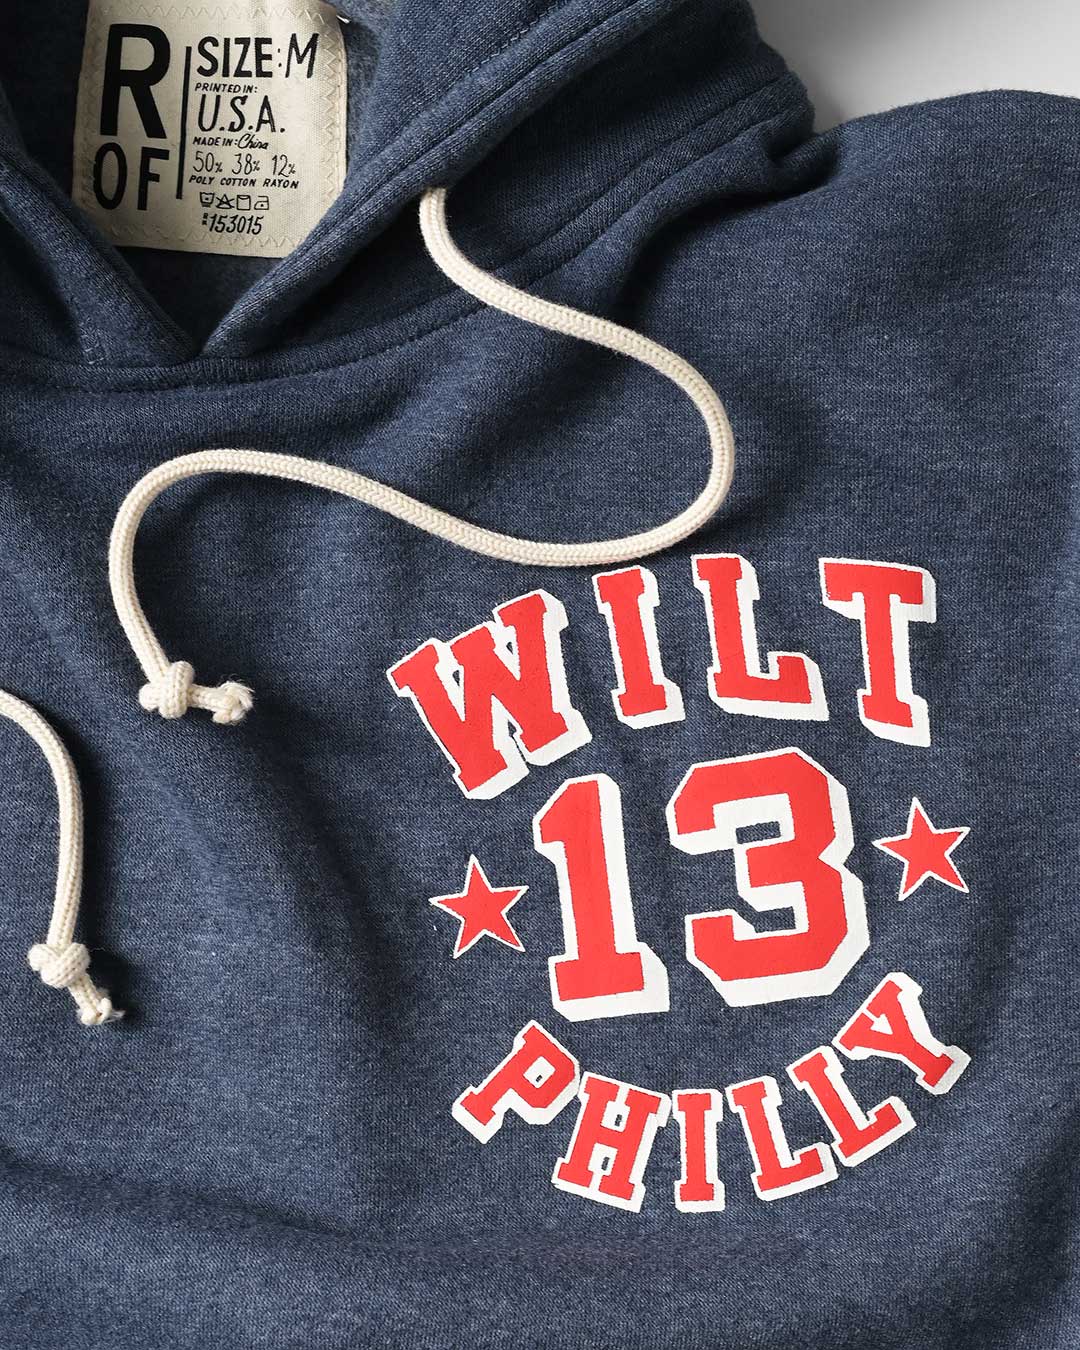 Wilt Chamberlain #13 Philly Navy PO Hoody - Roots of Fight